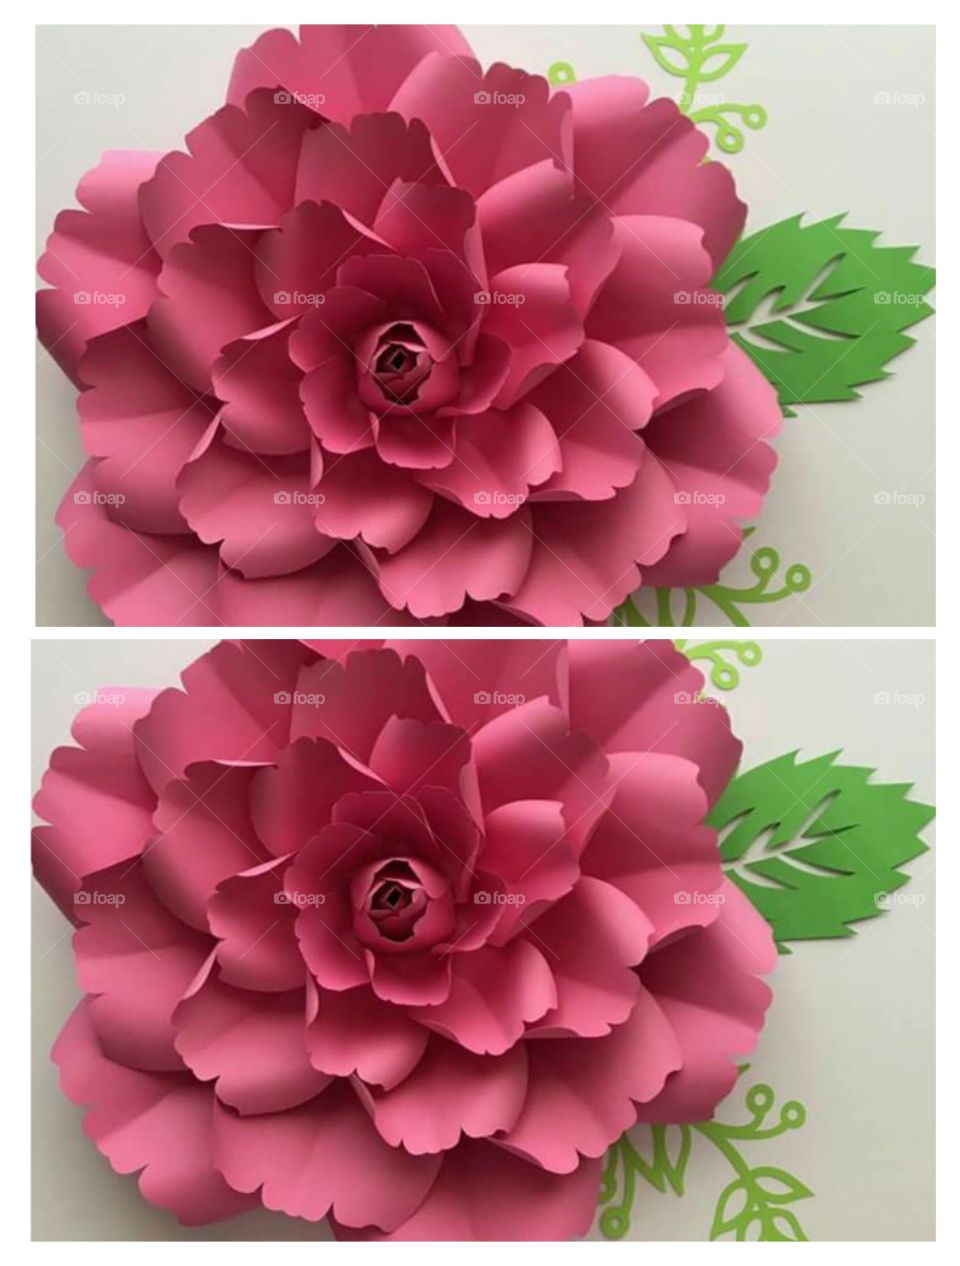 Flowers made from paper